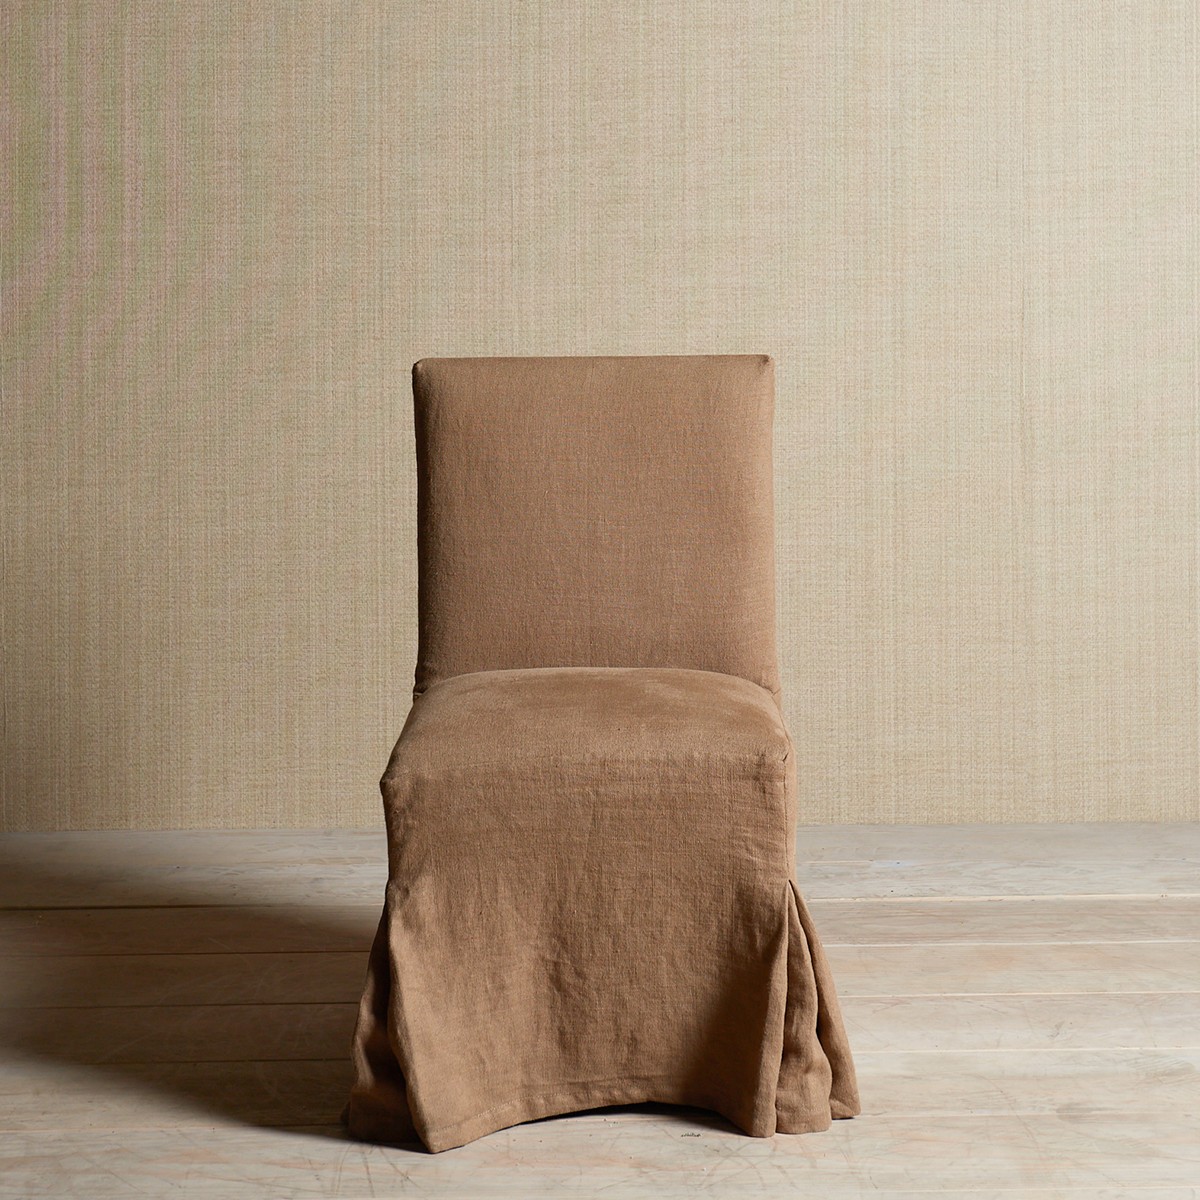 a chair with a brown cover on it